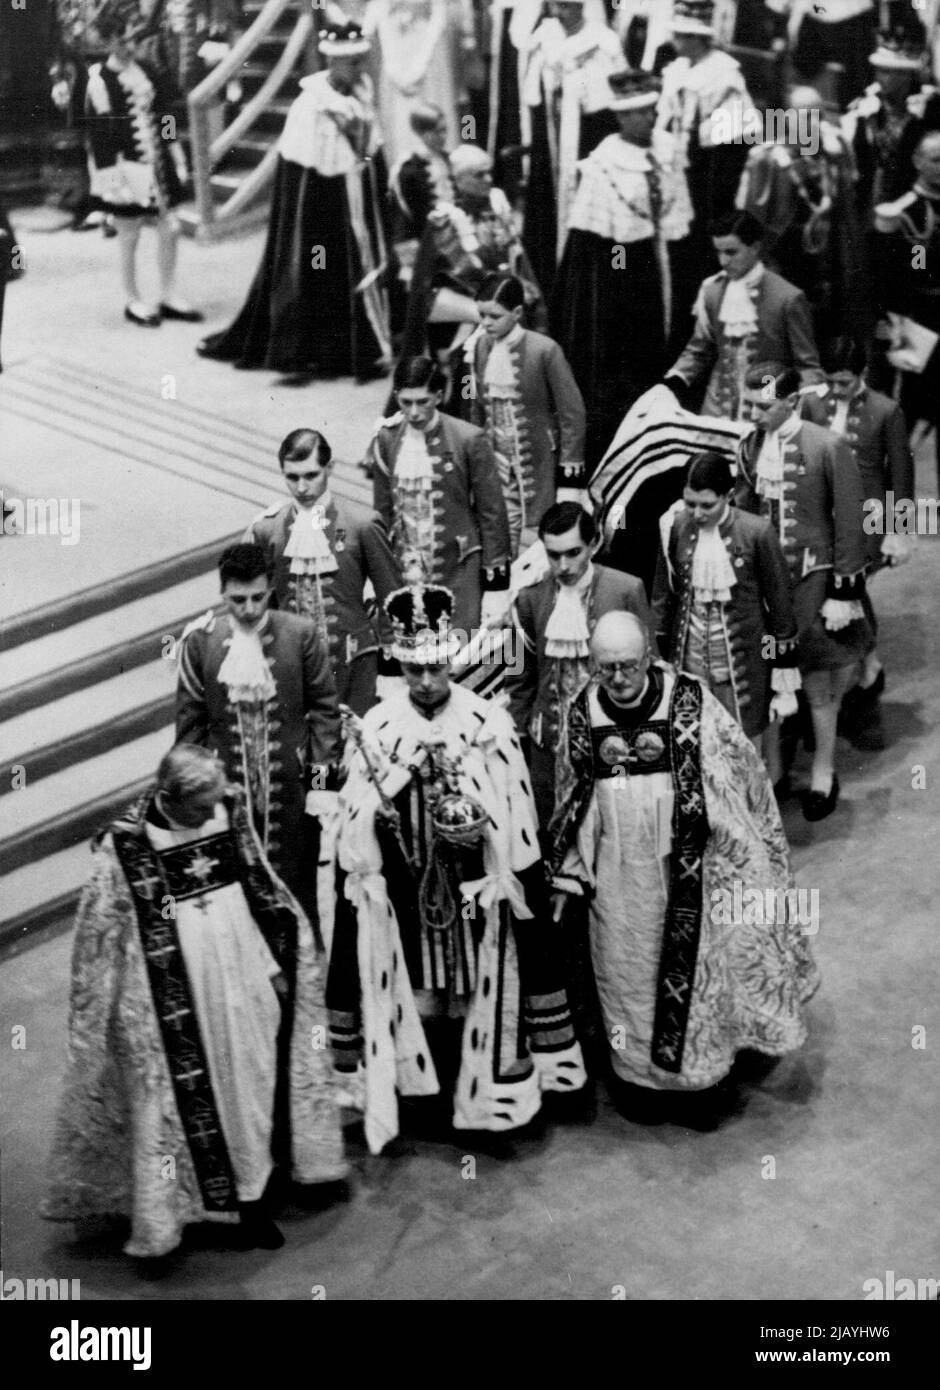 The Coronation Of King George VI, And Queen Elizabeth, Scenes In Westminster Abbey - H.M. The King carrying the Orb and Sceptre, followed by his retinue, leave the Abbey after the Ceremony. May 12, 1937. (Photo by Sport & General Press Association Limited). Stock Photo